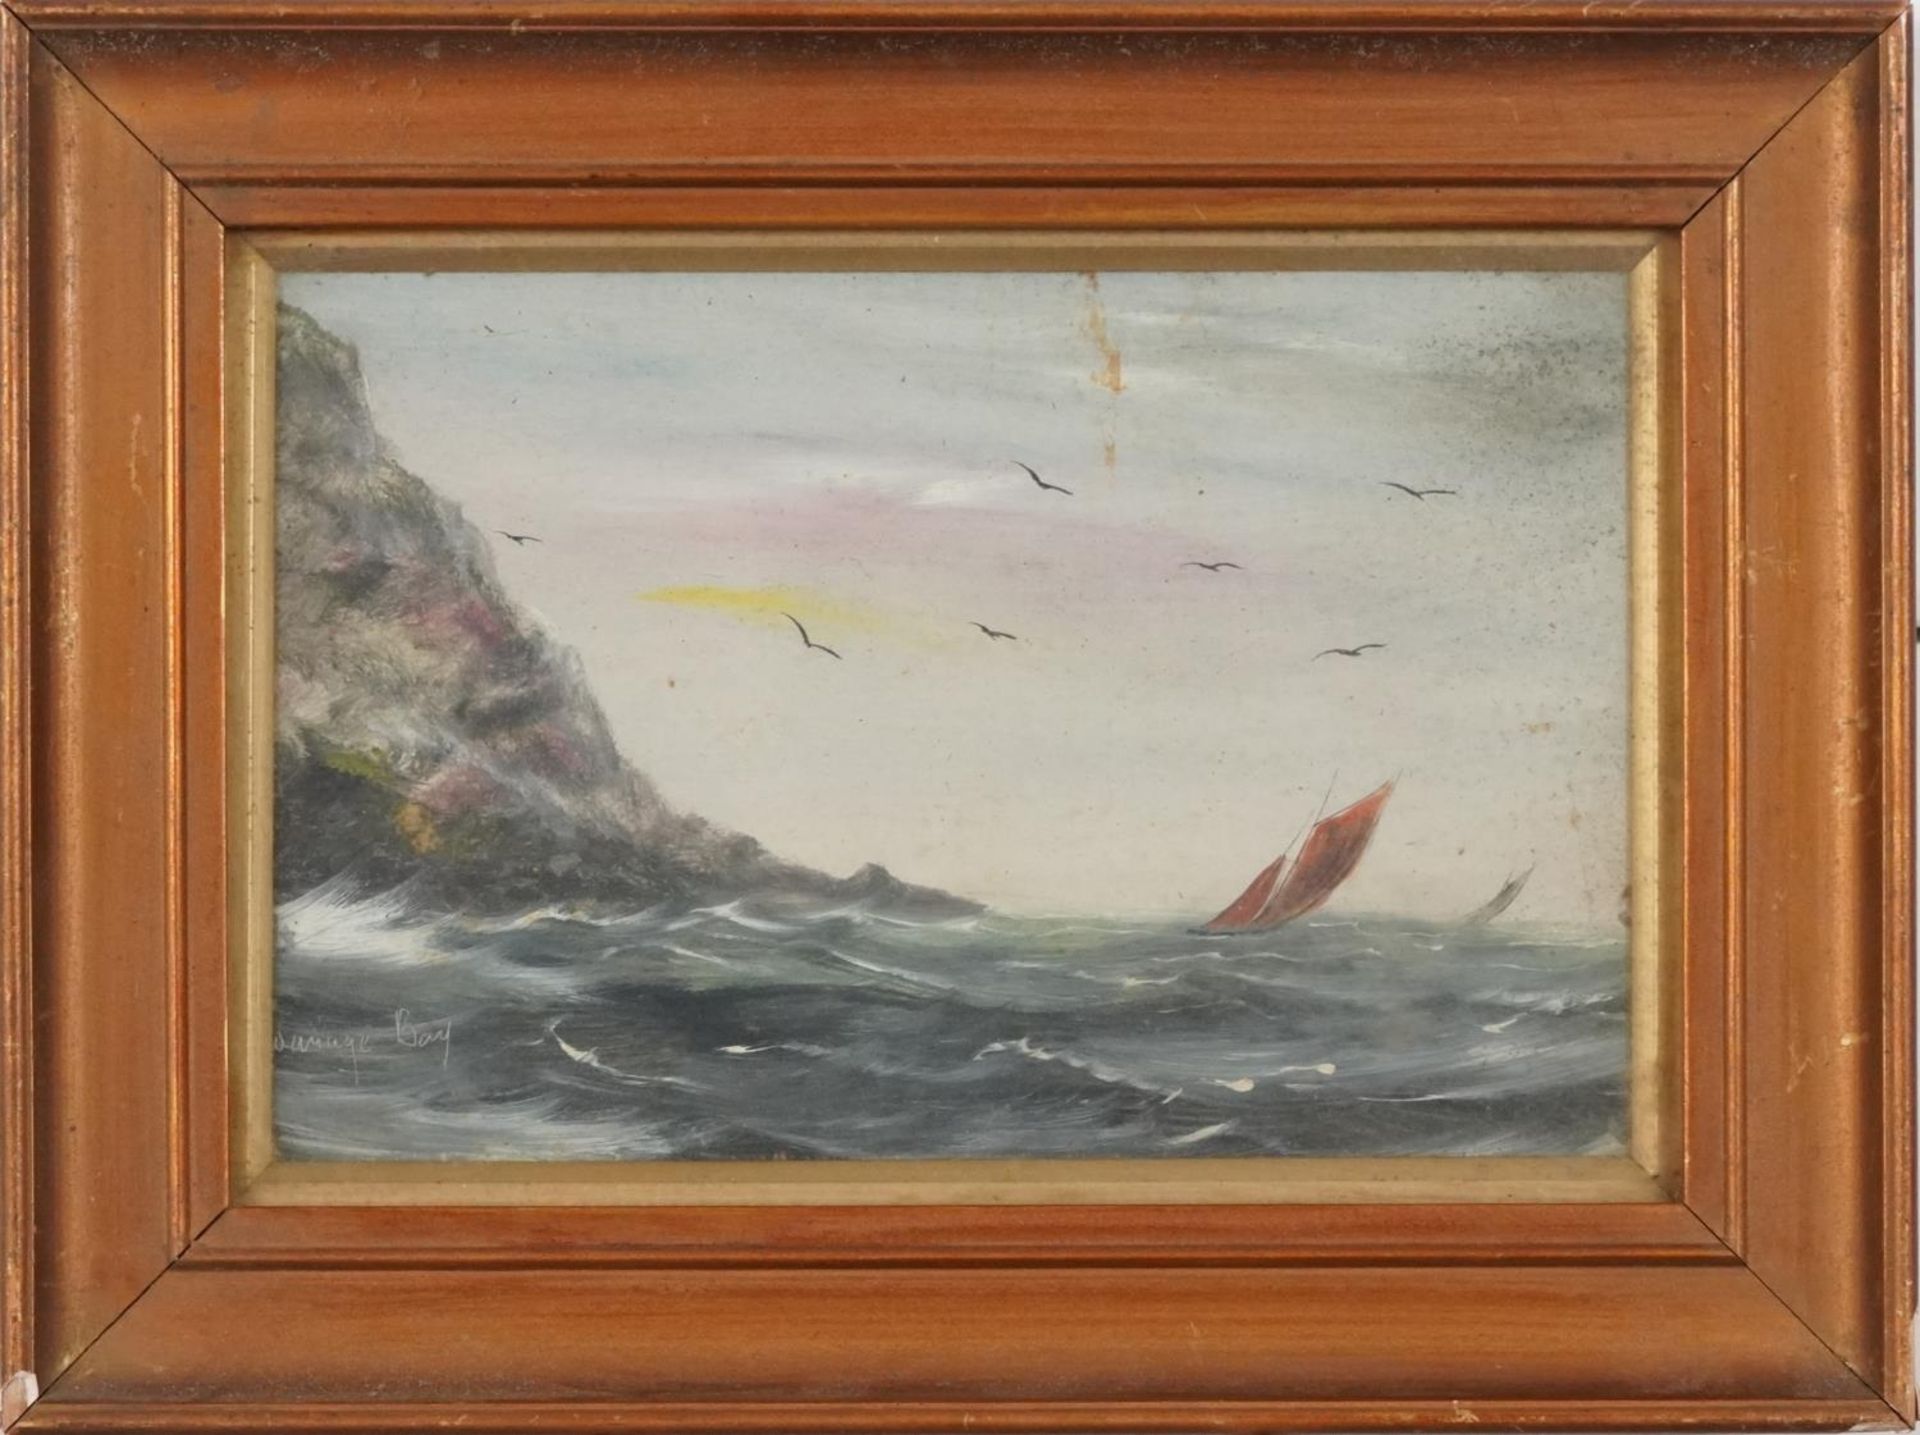 Swanage Bay and ... Rock, pair of shipping interest oil on boards, in gilt frames, each 22cm x - Image 8 of 11